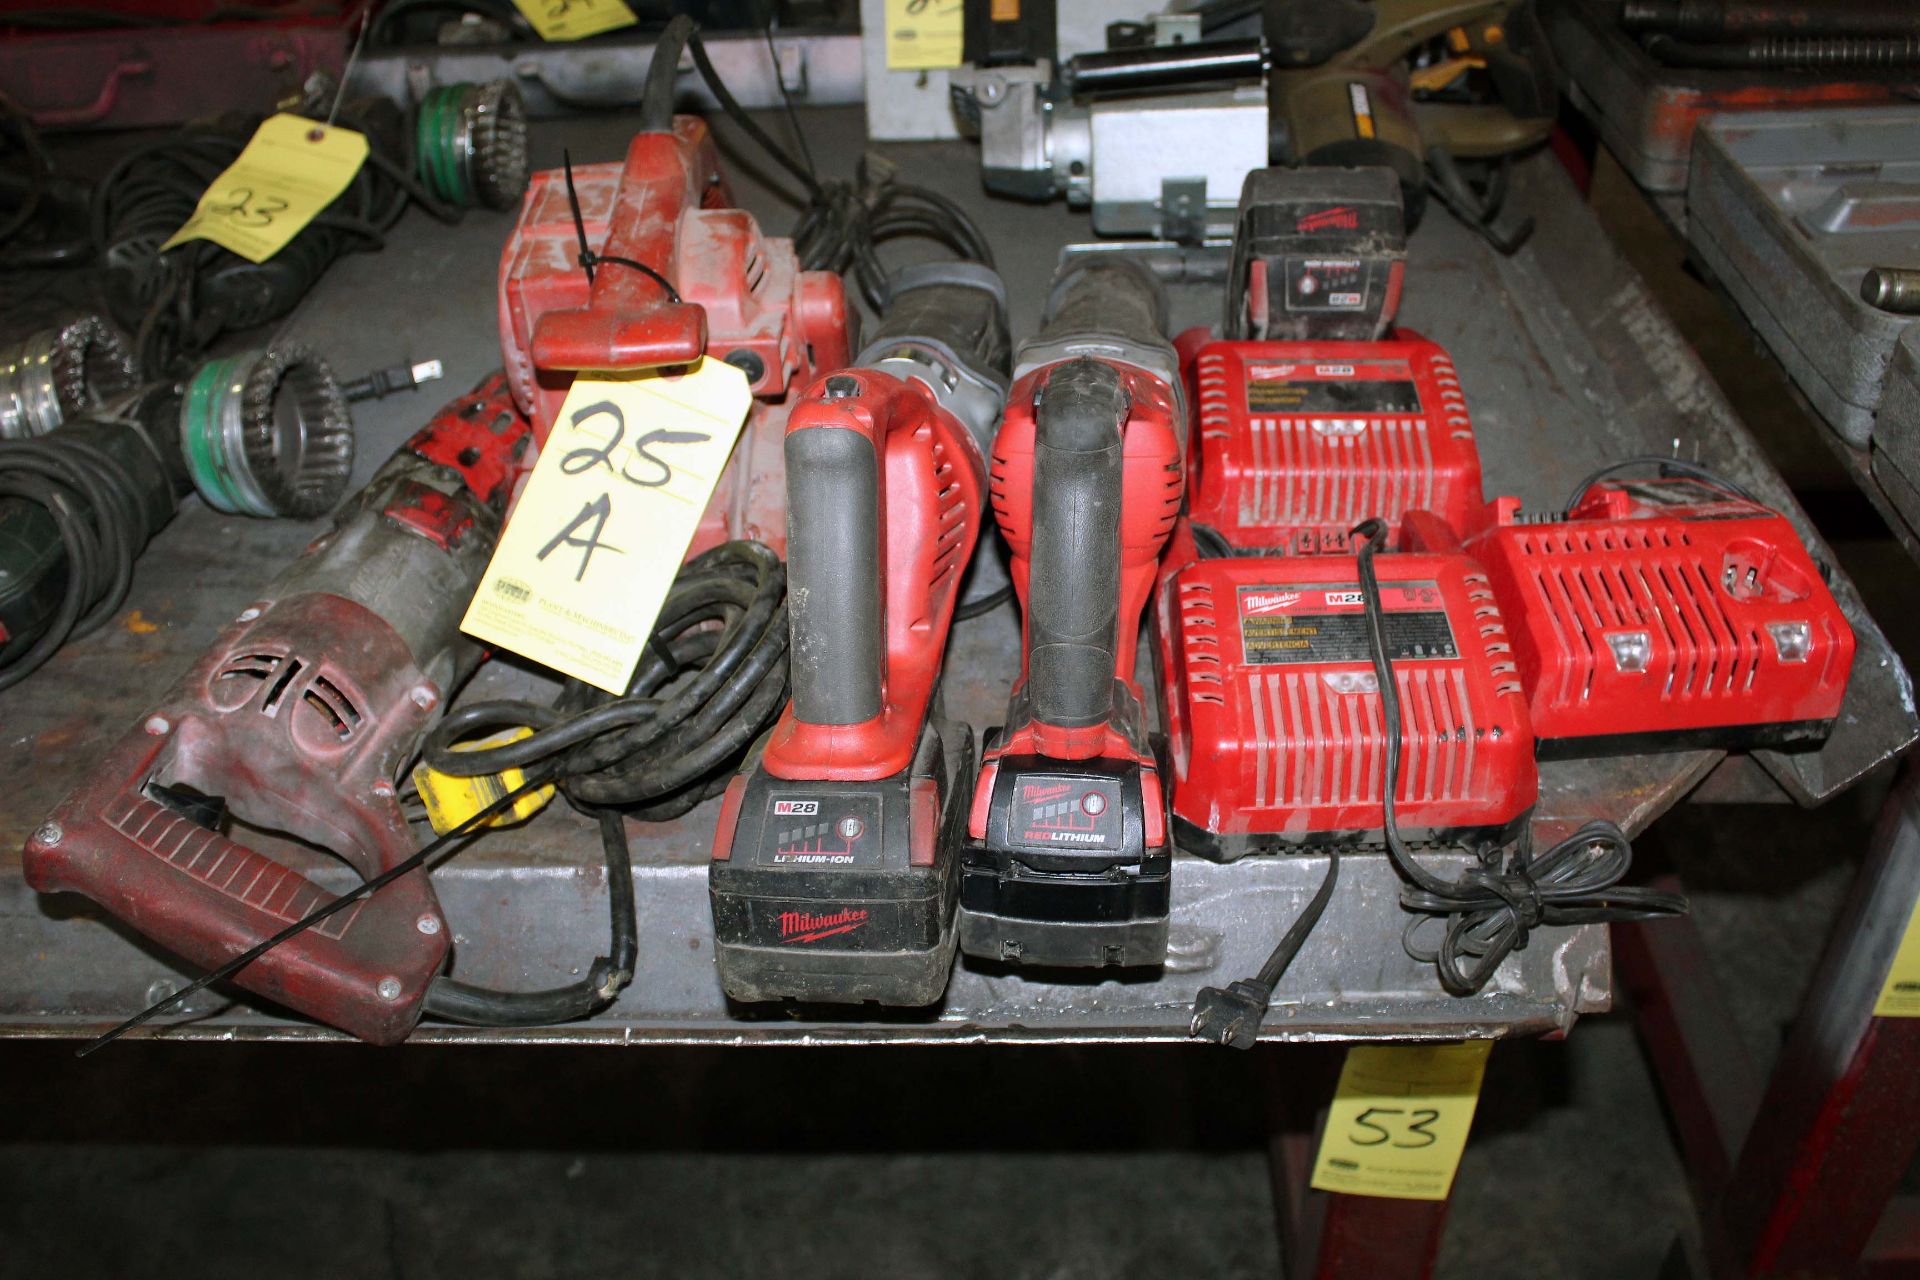 LOT CONSISTING OF: Milwaukee reciprocating saws, belt sander, rotary hammer drill, batteries &